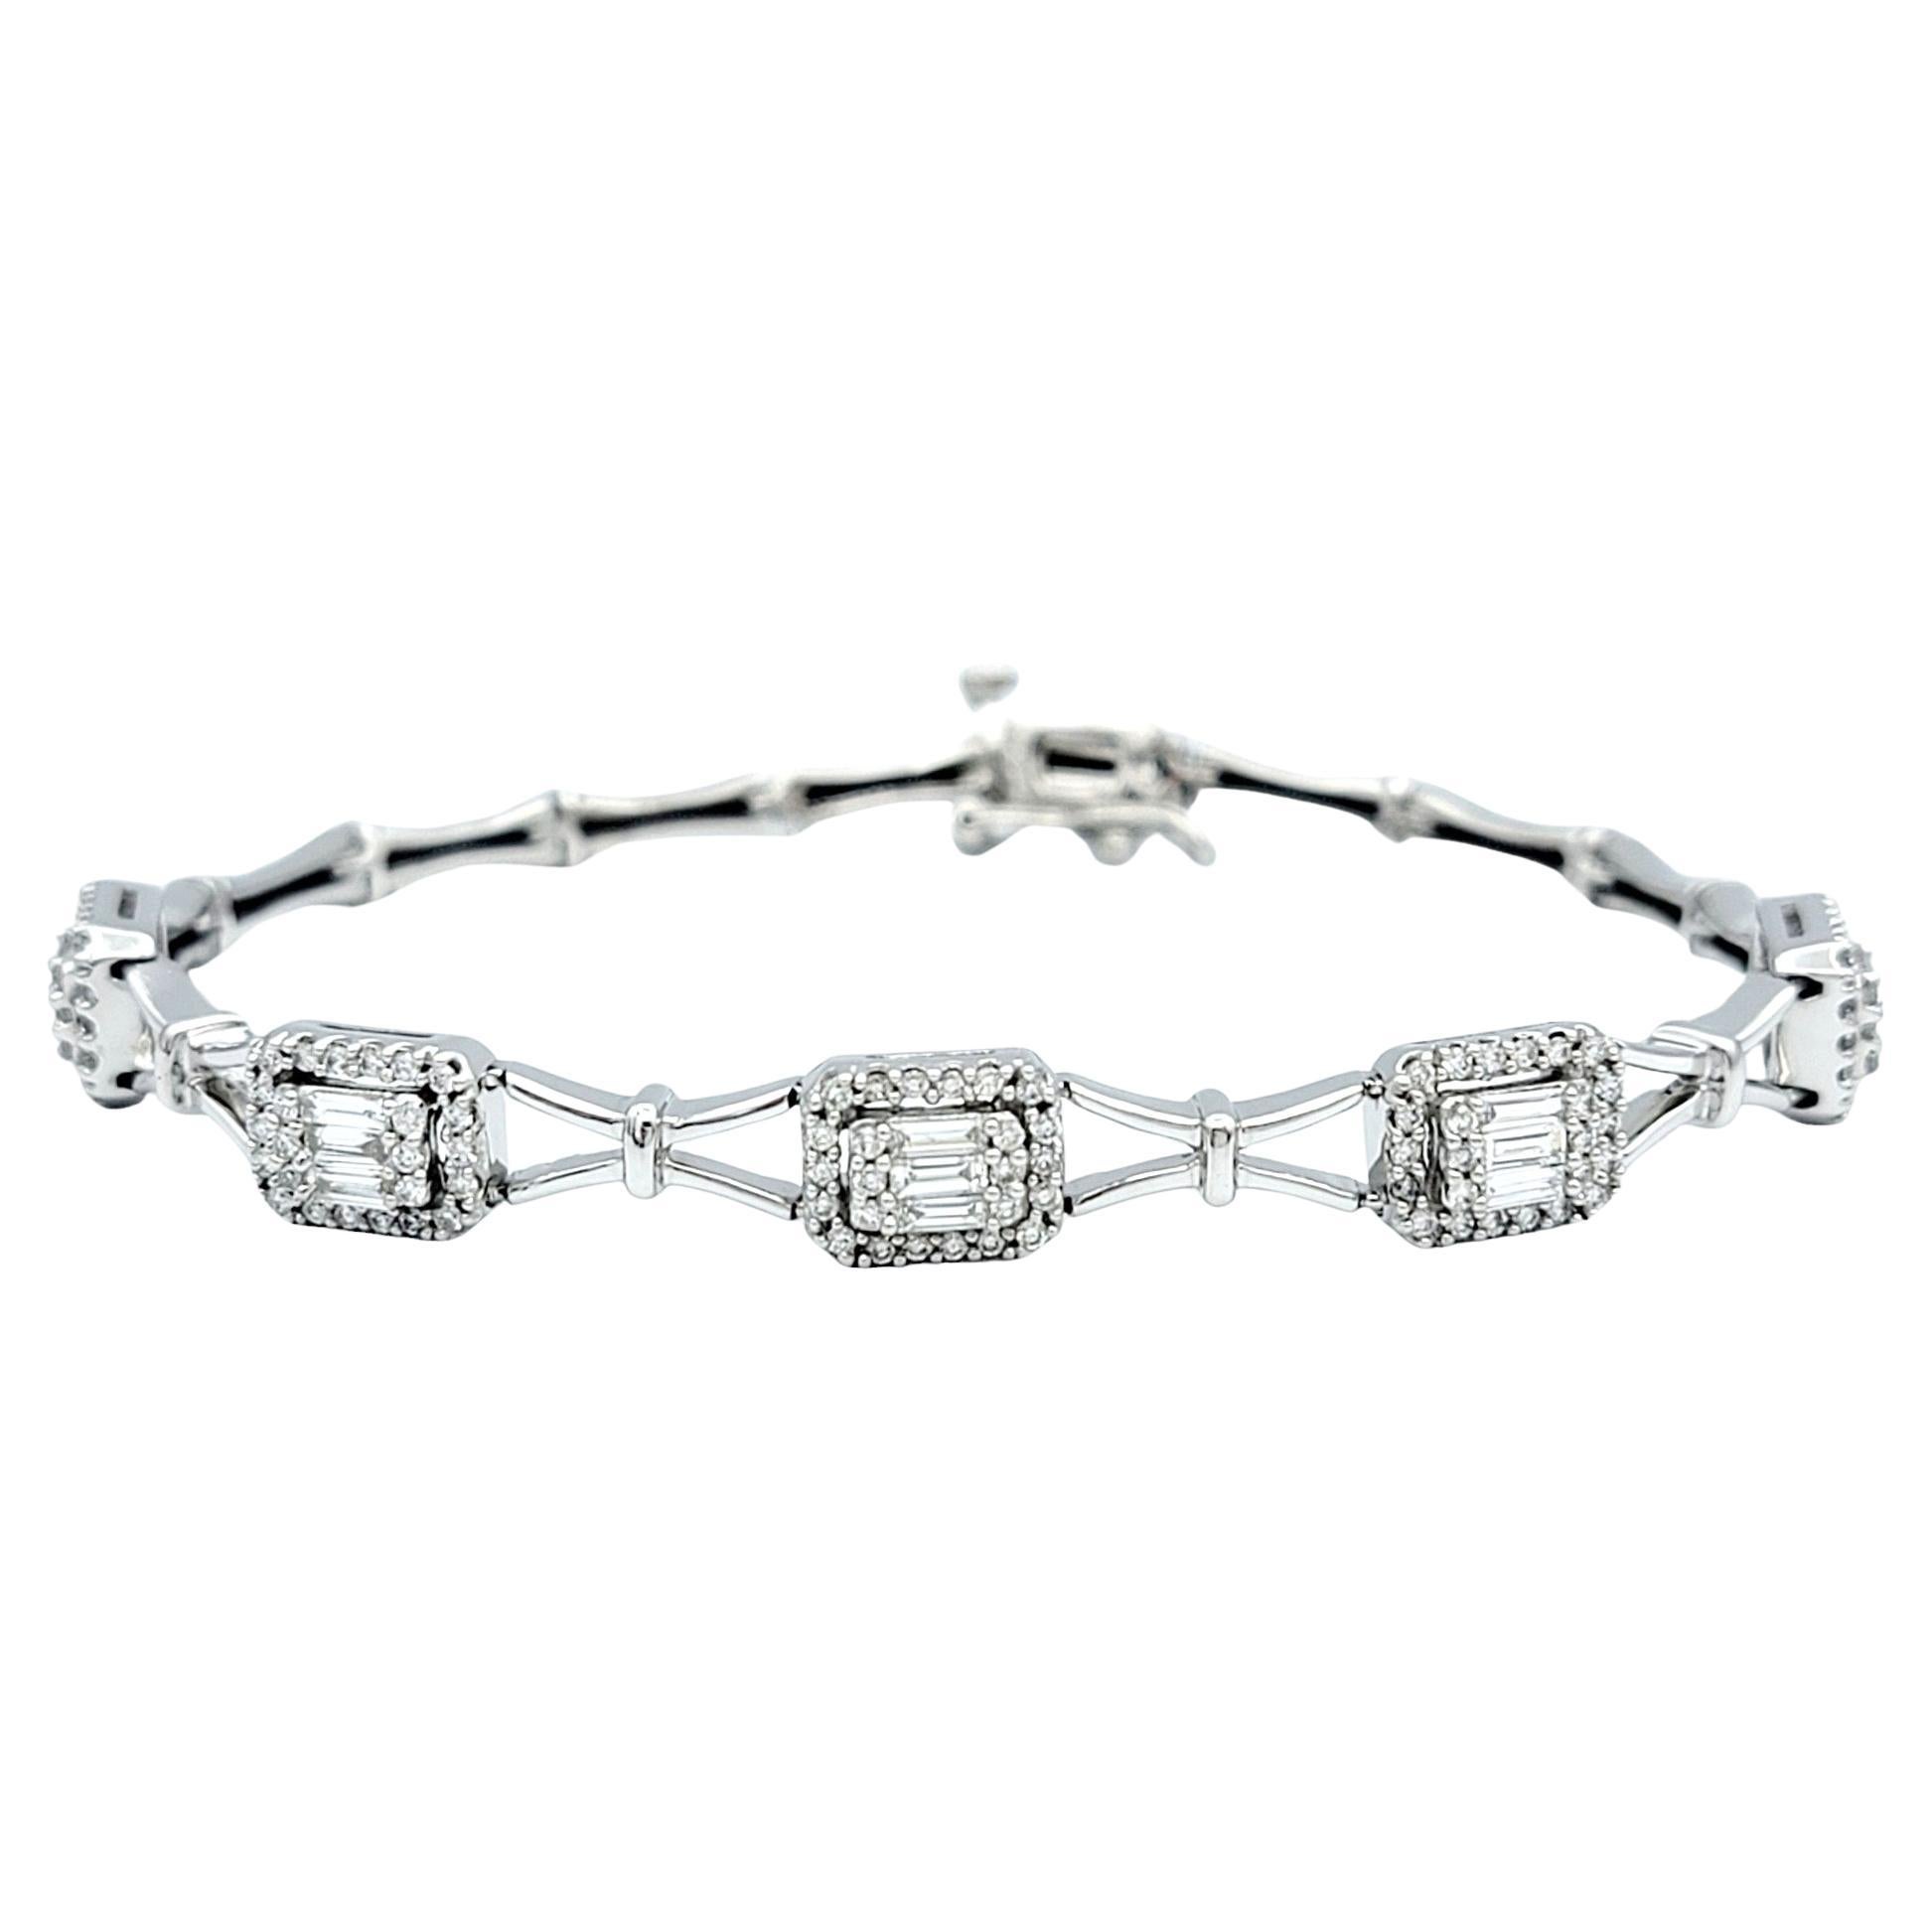 The inner circumference of this bracelet measures 6.5 inches and will comfortably fit a 5.75 - 6.25 inch wrist. 

This shimmering link bracelet, set in stunning 14 karat white gold, is a luxurious and elegant piece that exudes sophistication. Each